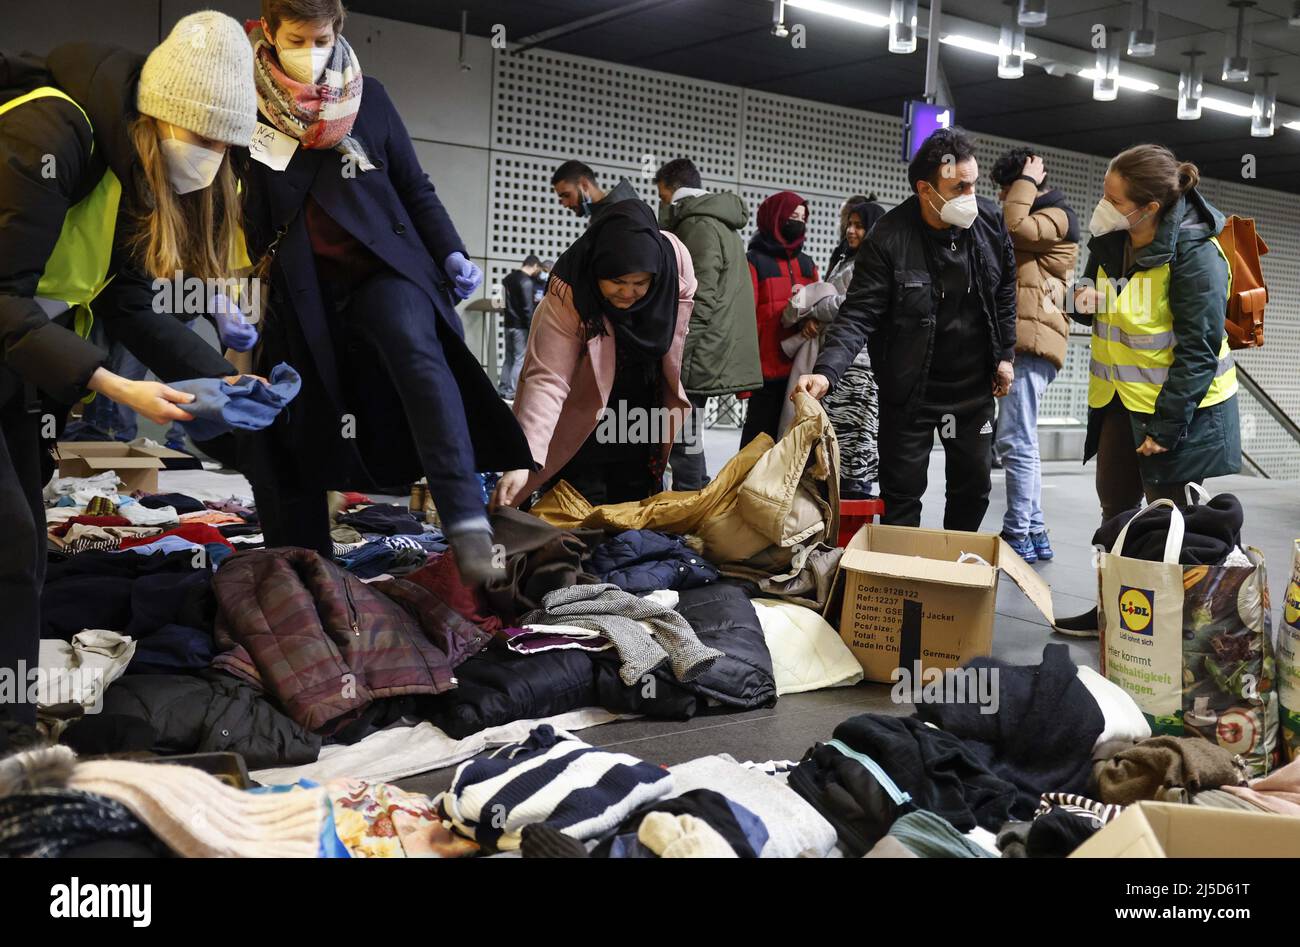 Berlin, 02.03.2022 - Refugees from Ukraine who have arrived at Berlin Central Station can take donated clothing and sanitary items. Thousands of refugees from Ukraine have already arrived in Germany. [automated translation] Stock Photo